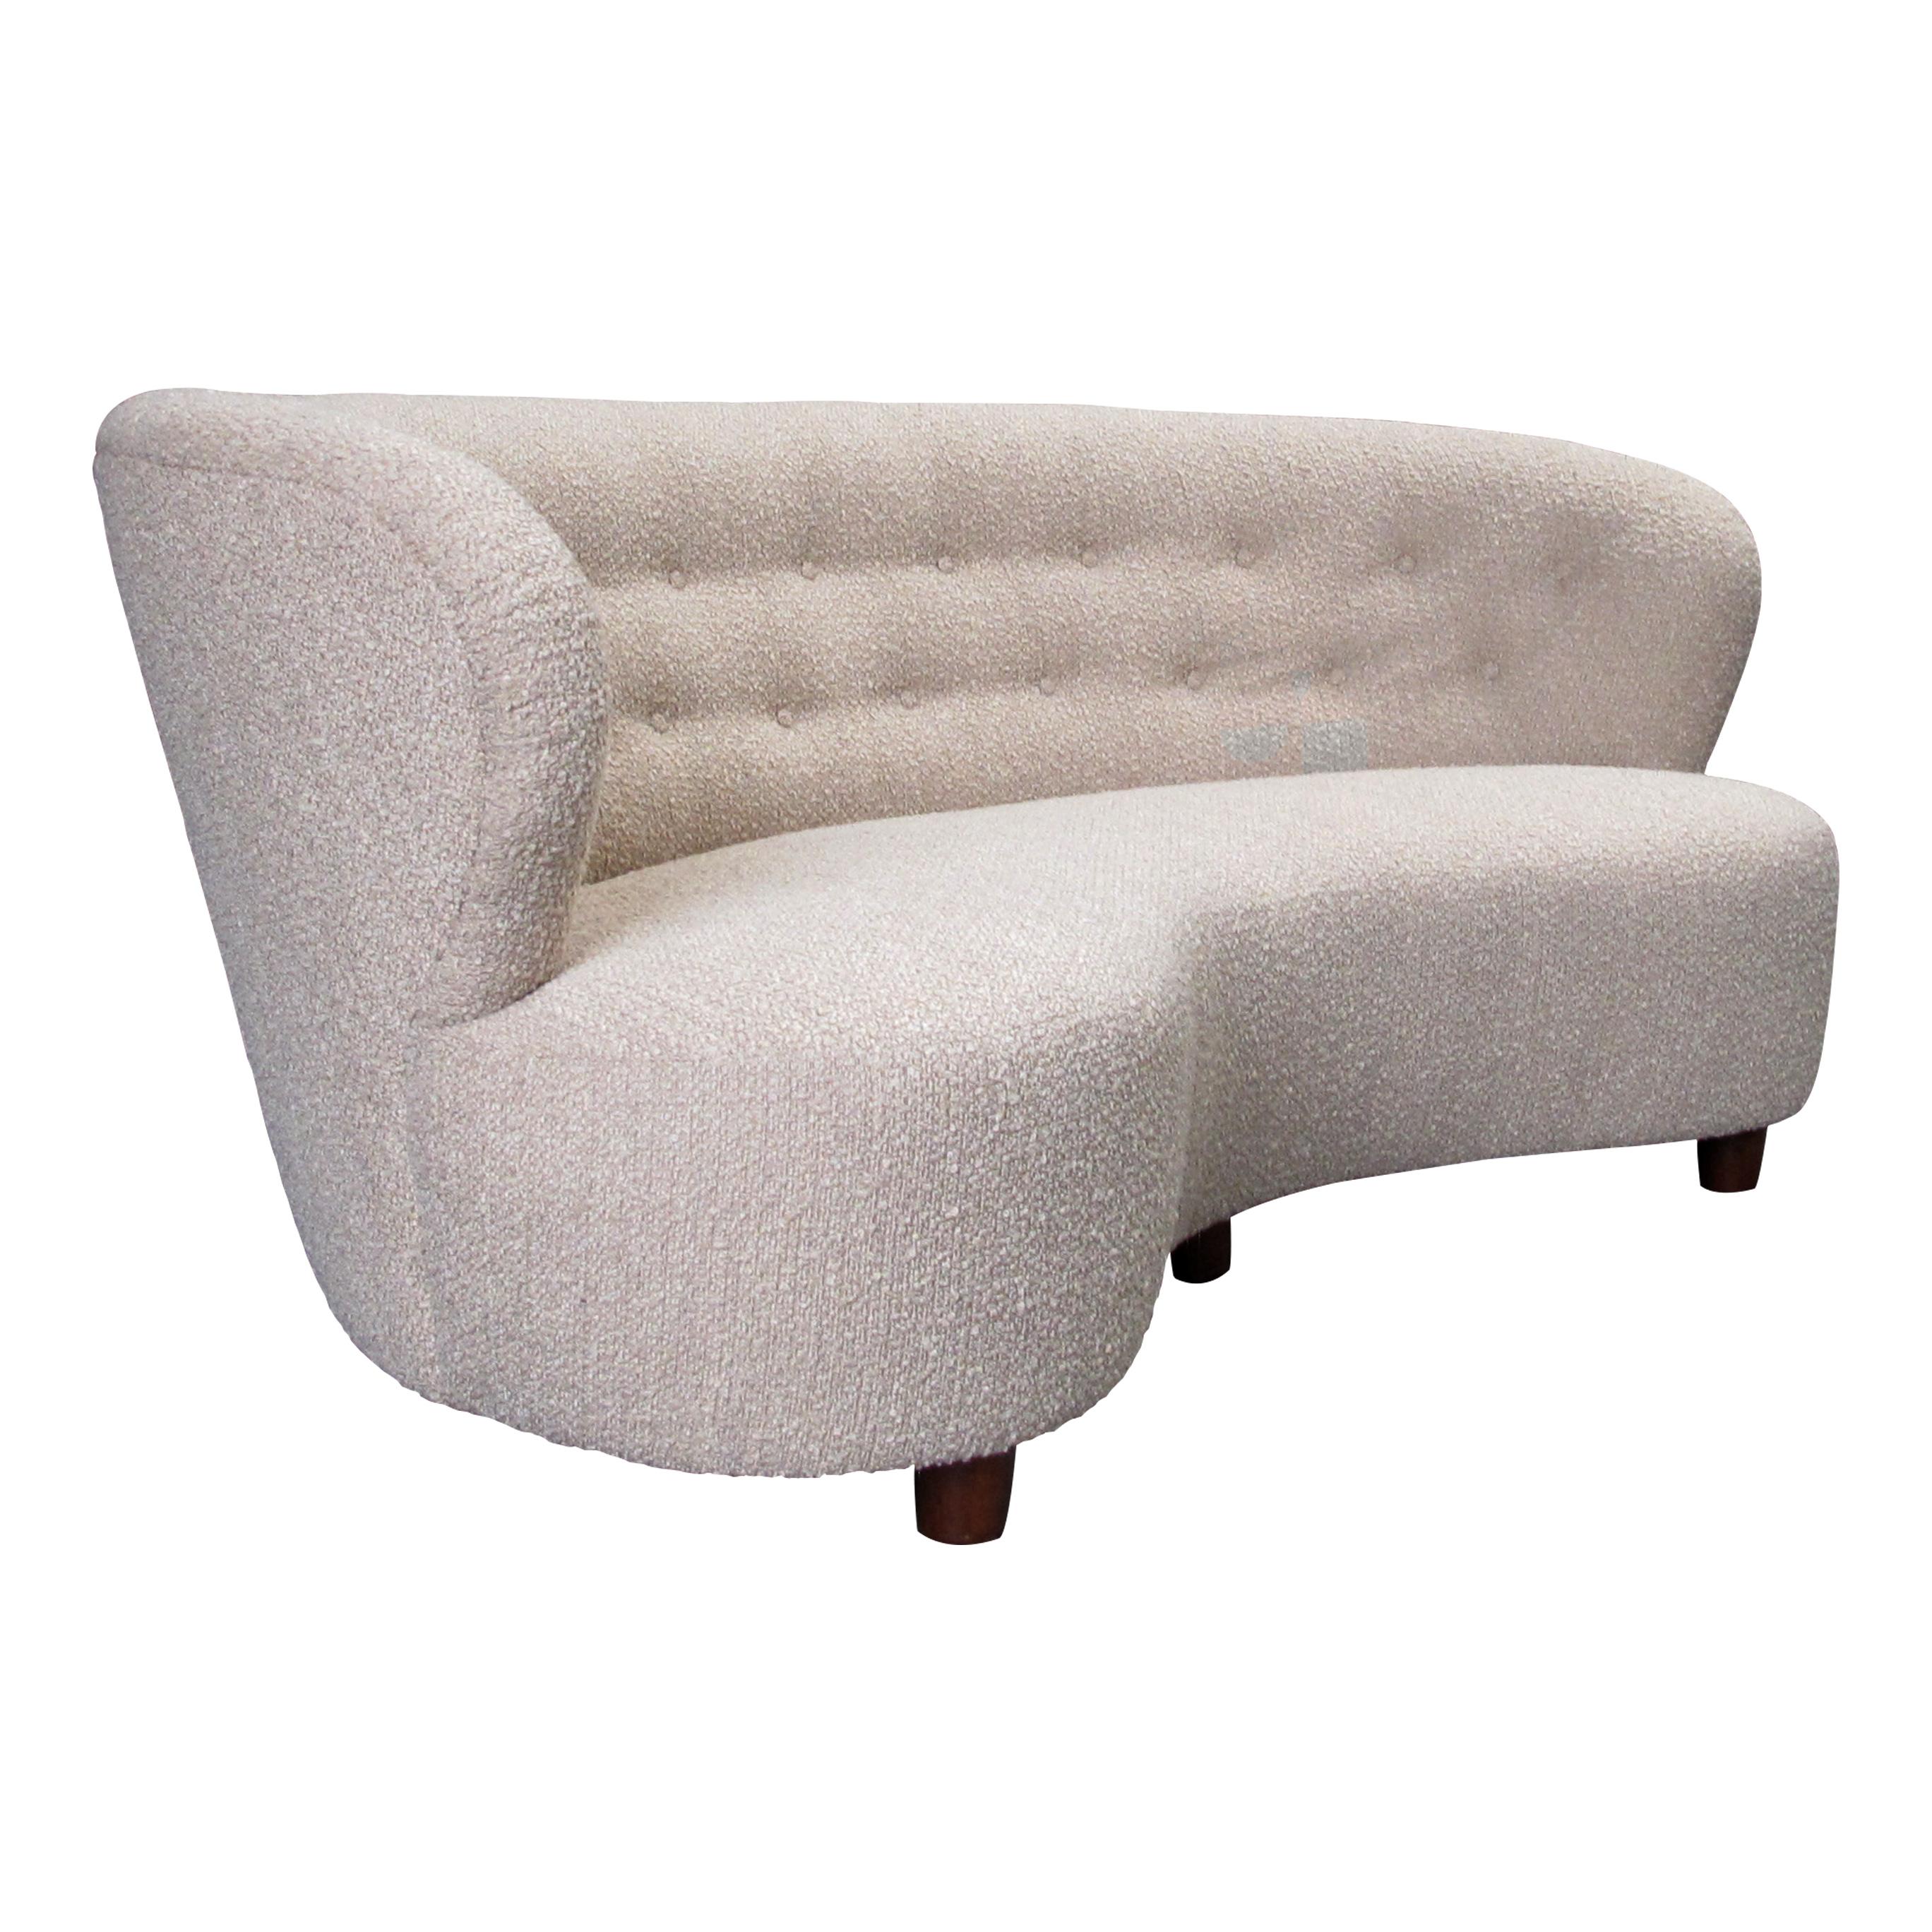 This comfortable large sofa is a classic Danish modern design from the 1940s. It has a simple, elegant design with clean lines and a curved back. The oak frame is sturdy and well-made, and the new short-pile boucle fabric upholstery is soft and